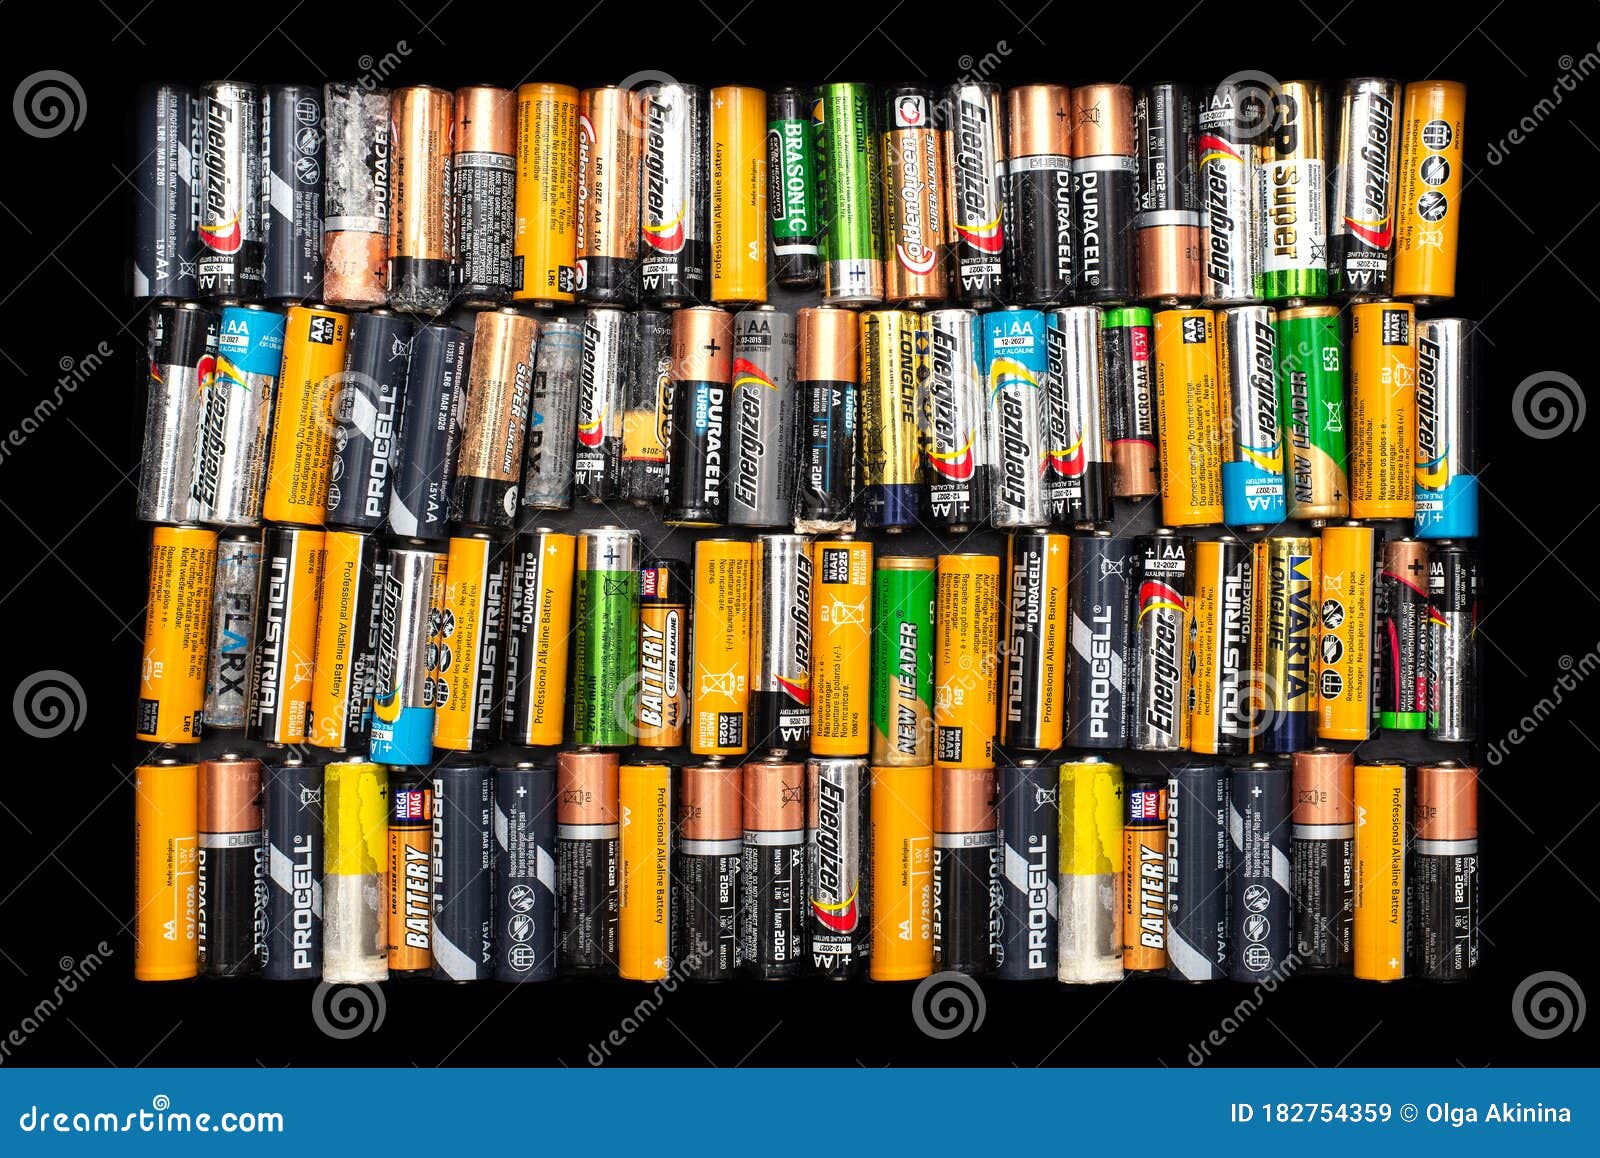 Used Alkaline Batteries Aa Size Format Of Different Brands Ready For